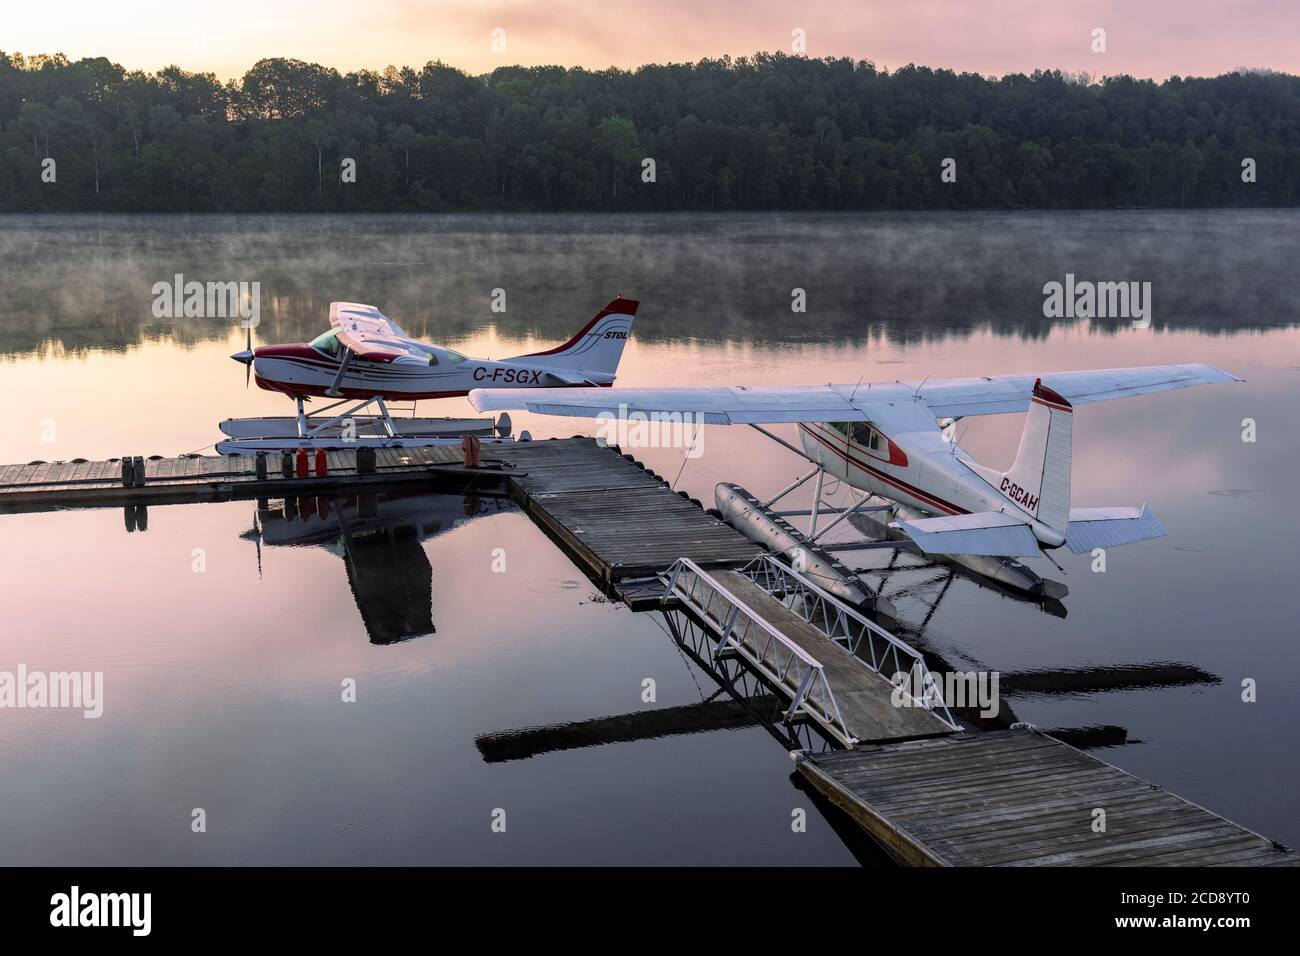 Canada, Province of Quebec, Mauricie Region, Hydravion Aventure, Hydrobase, Wharf for Seaplanes in the morning Stock Photo